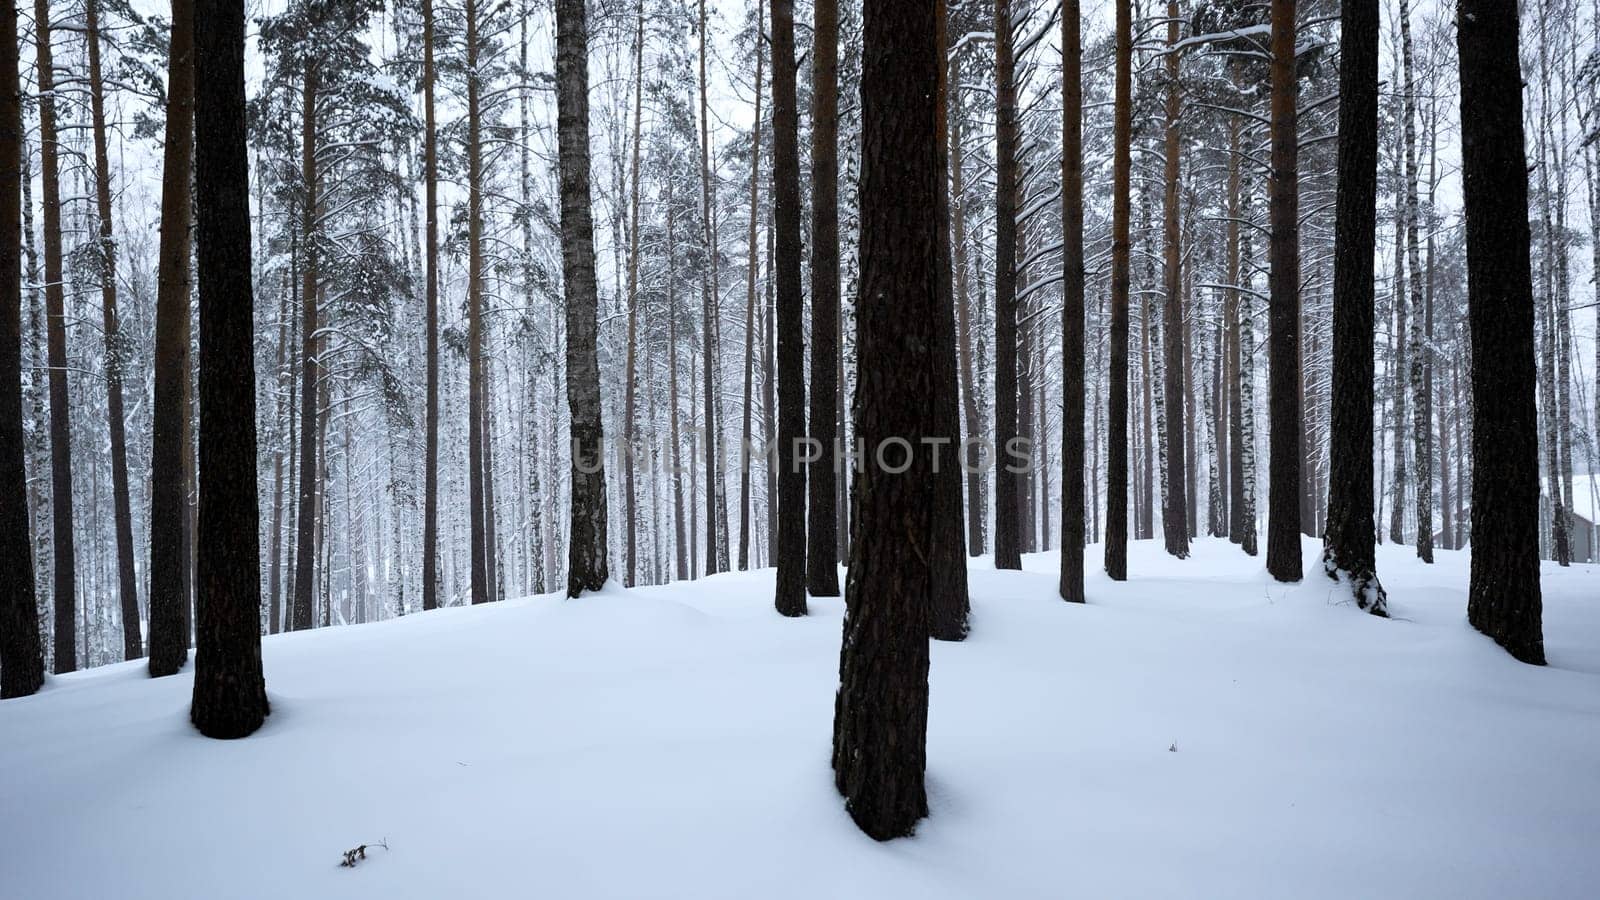 Winter landscape with pine trees covered with snow in white forest. Media. Fairytale winter forest during snowfall. by Mediawhalestock